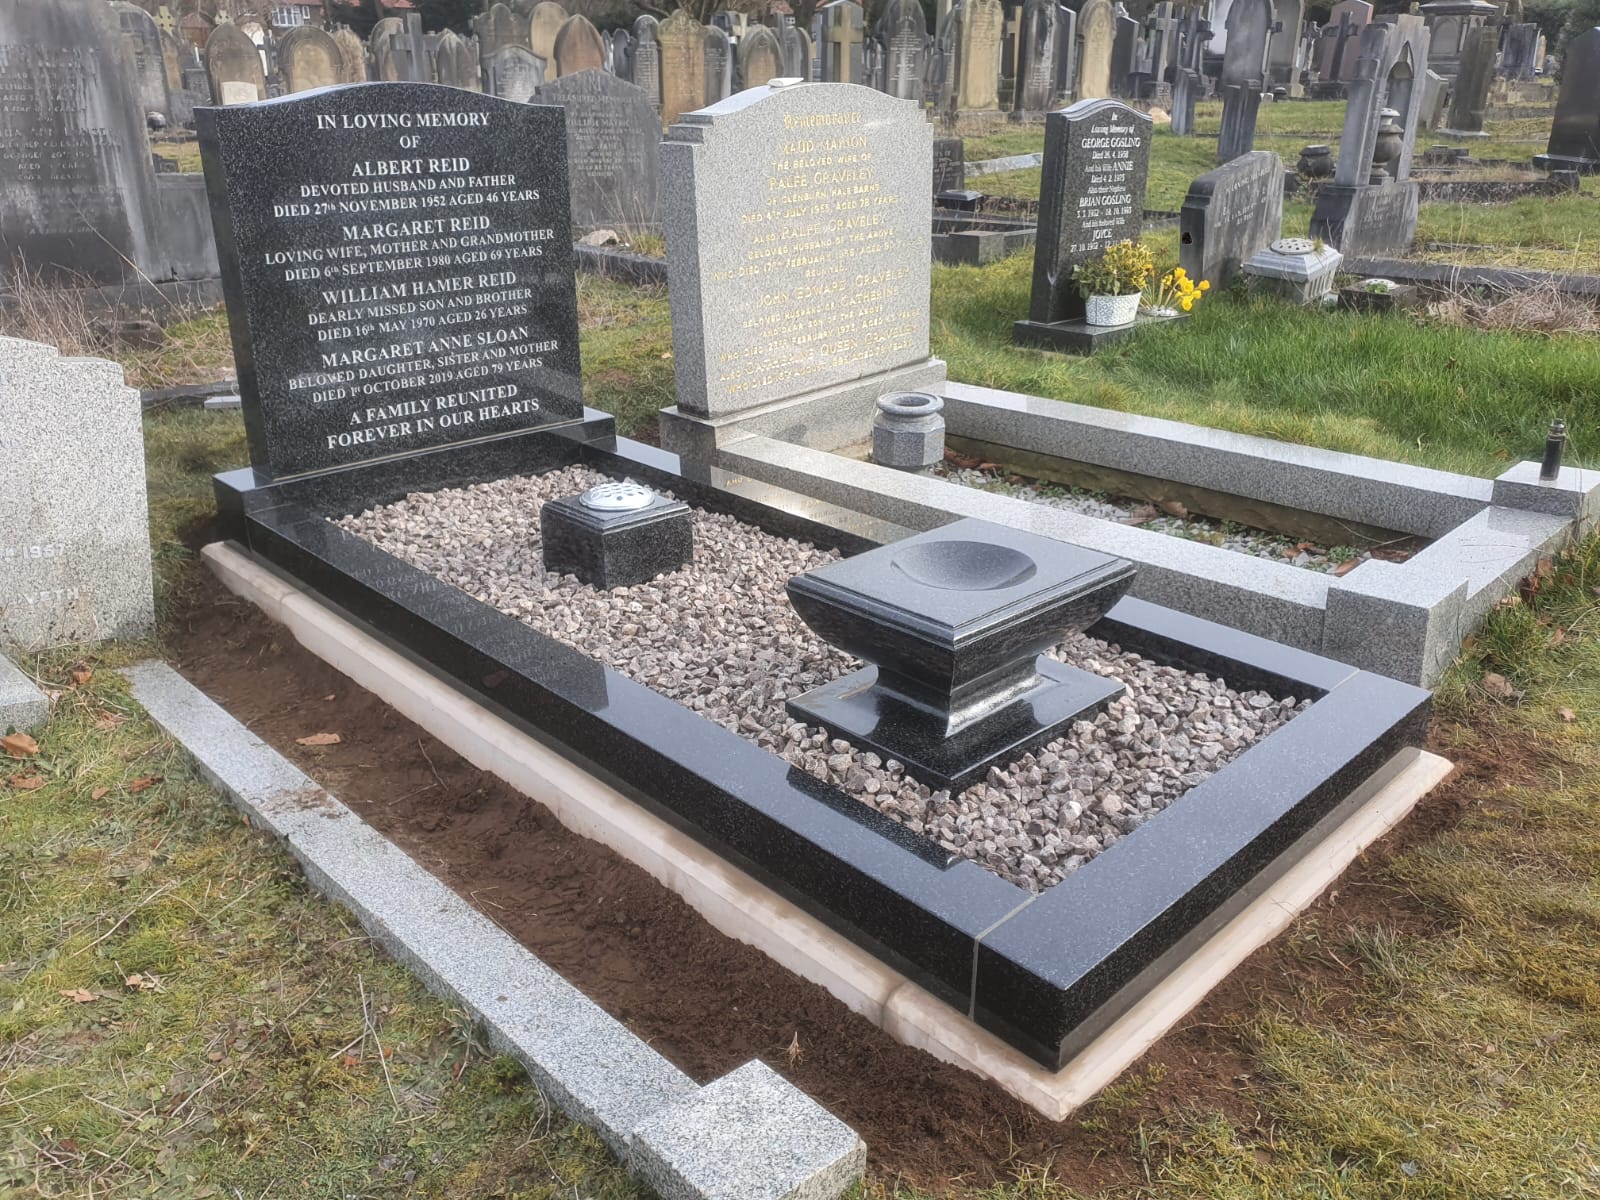 Headstone Design Hand-Carved by Expert Memorial Masons at Northern Headstones